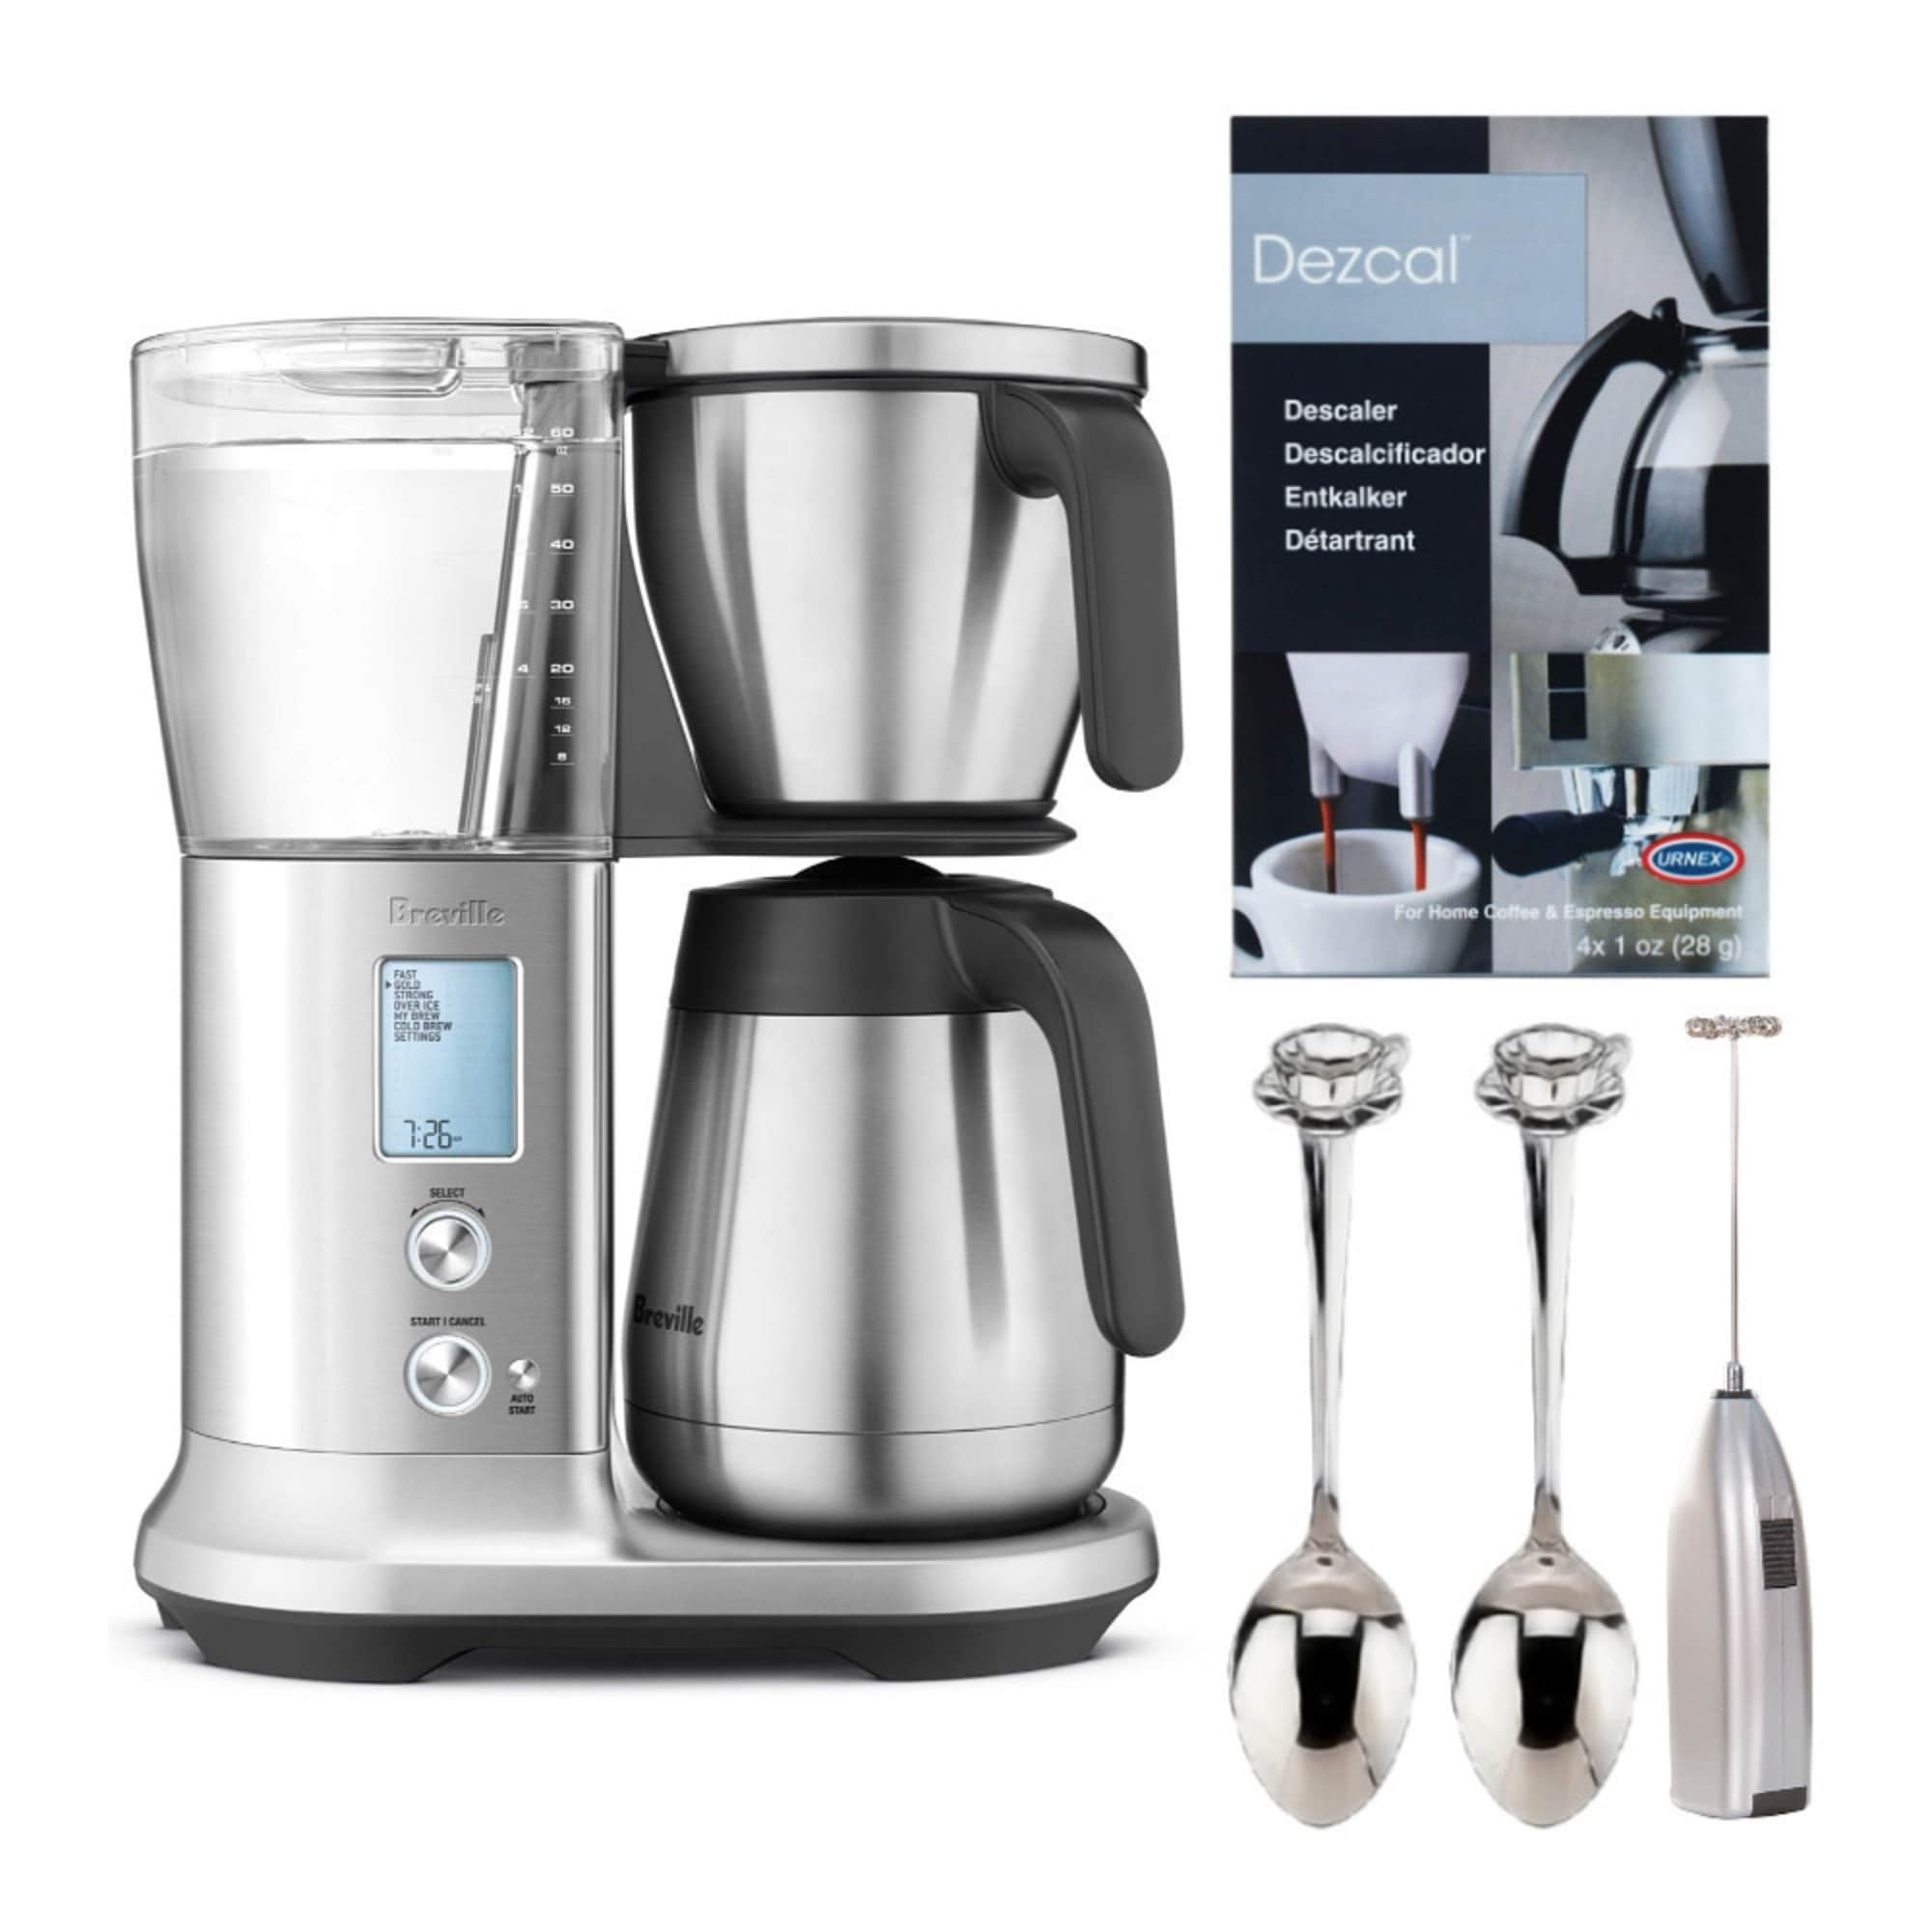 https://ak1.ostkcdn.com/images/products/is/images/direct/245a7d832cab11c21f79609bae4946849d2b8cd1/Breville-Precision-Brewer-Thermal-Coffee-Maker-with-Accessory-Bundle.jpg